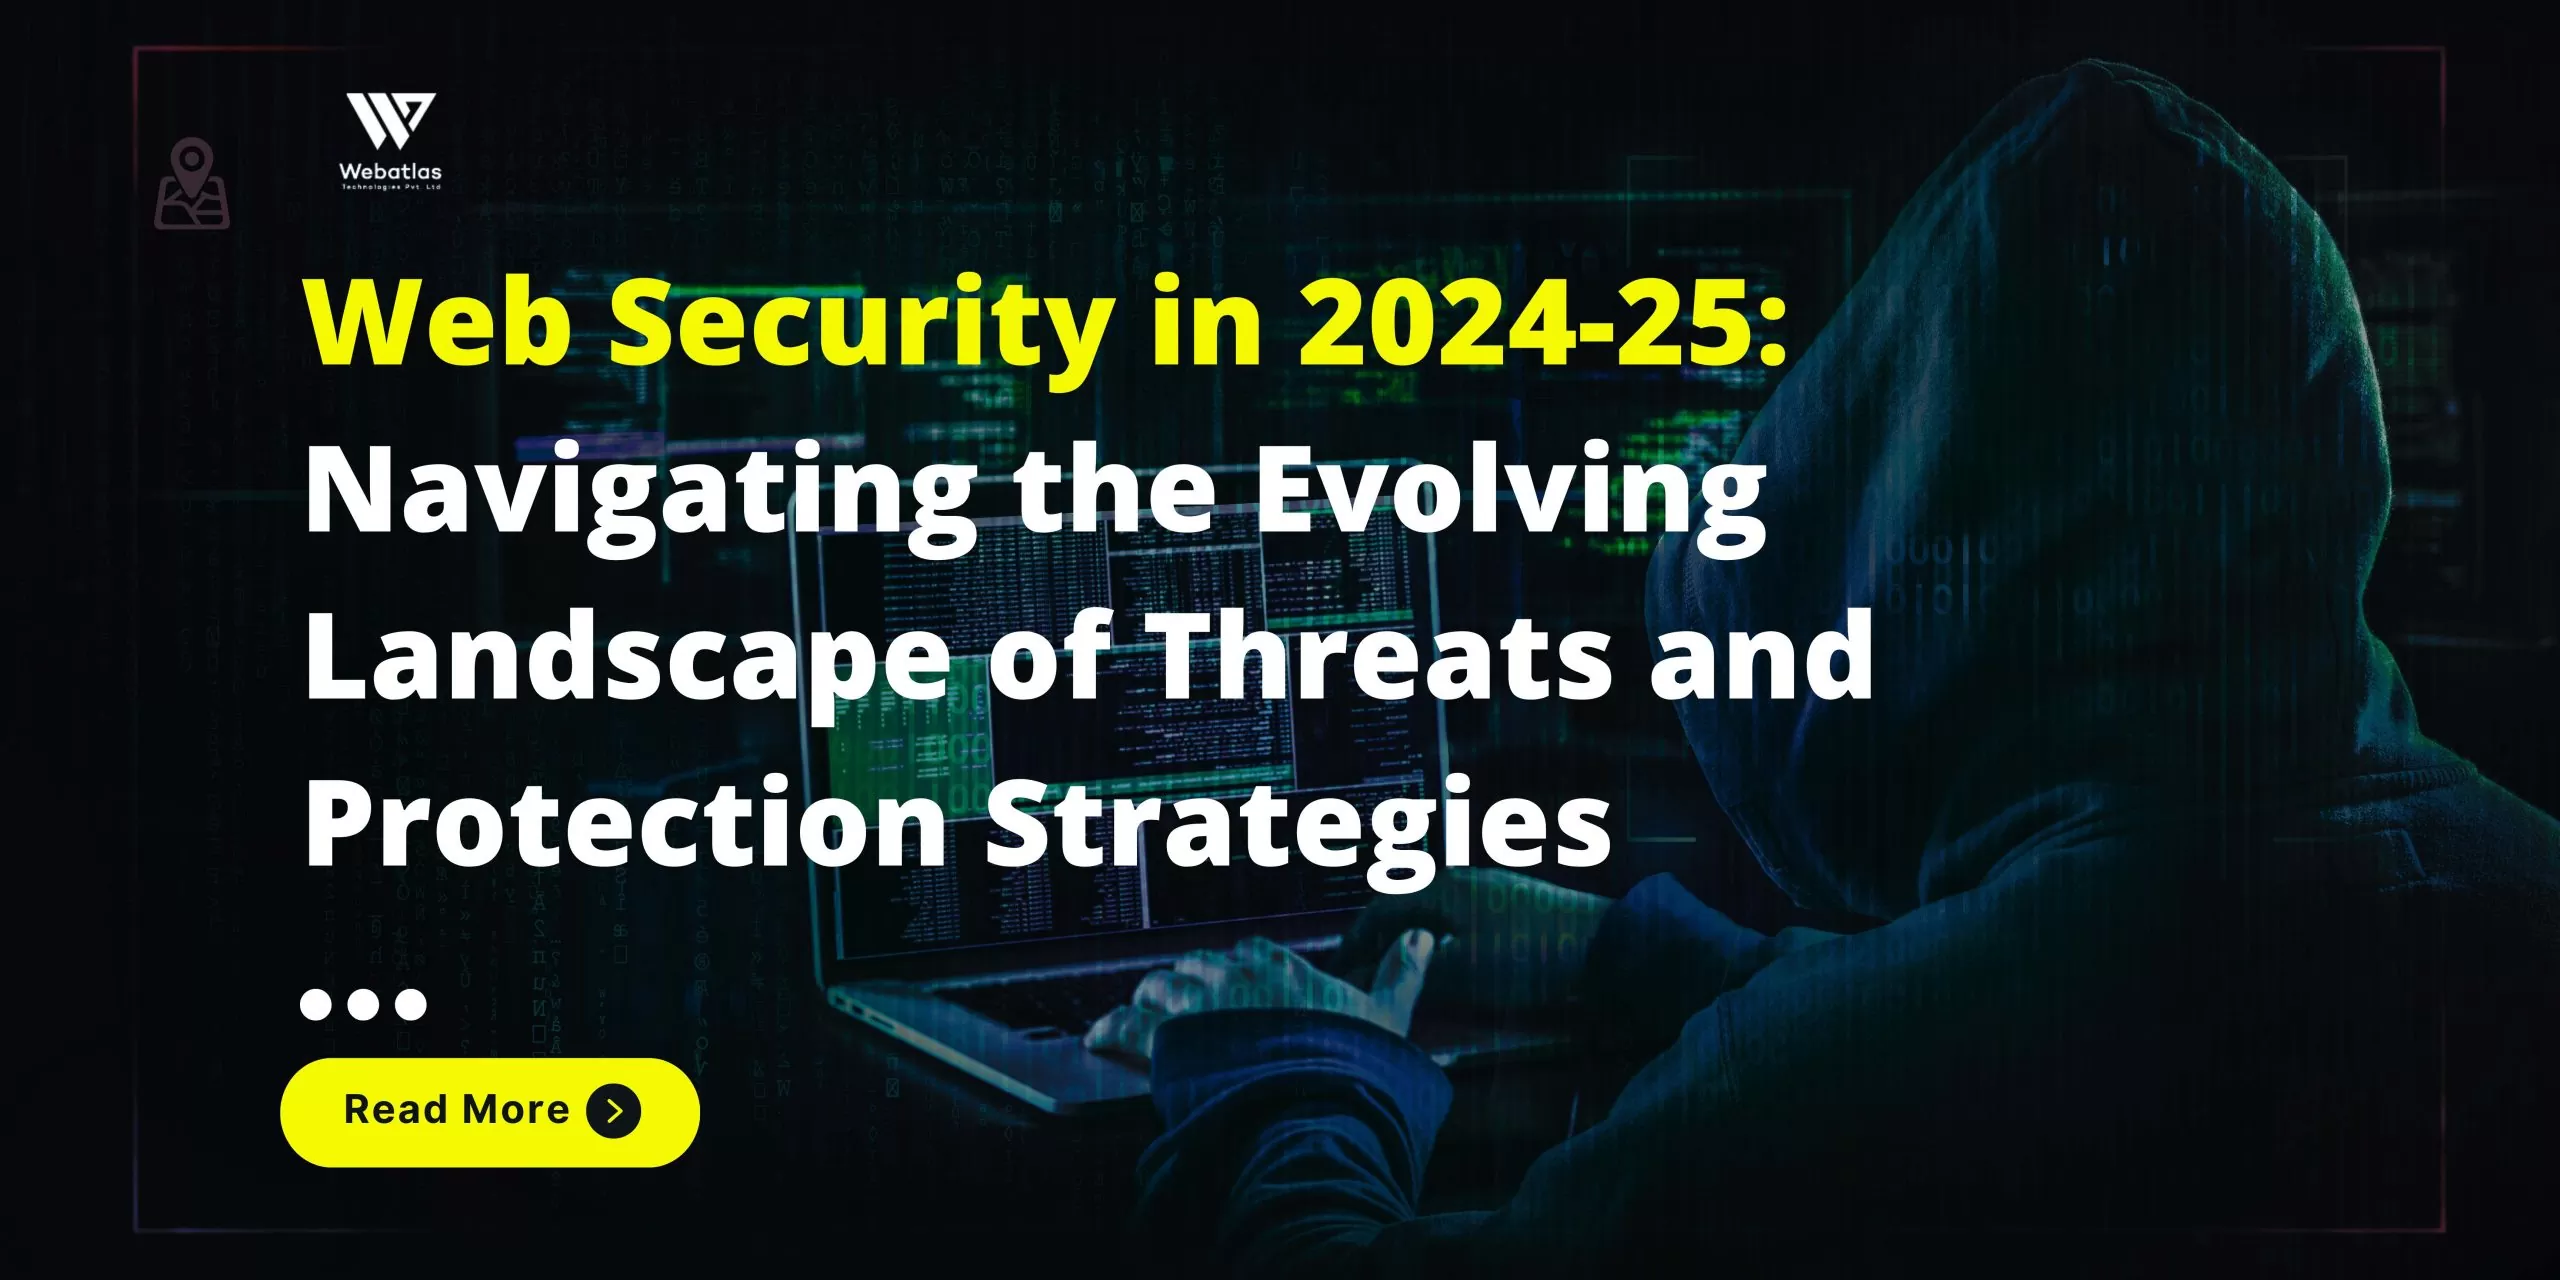 Web Security in 2024-25